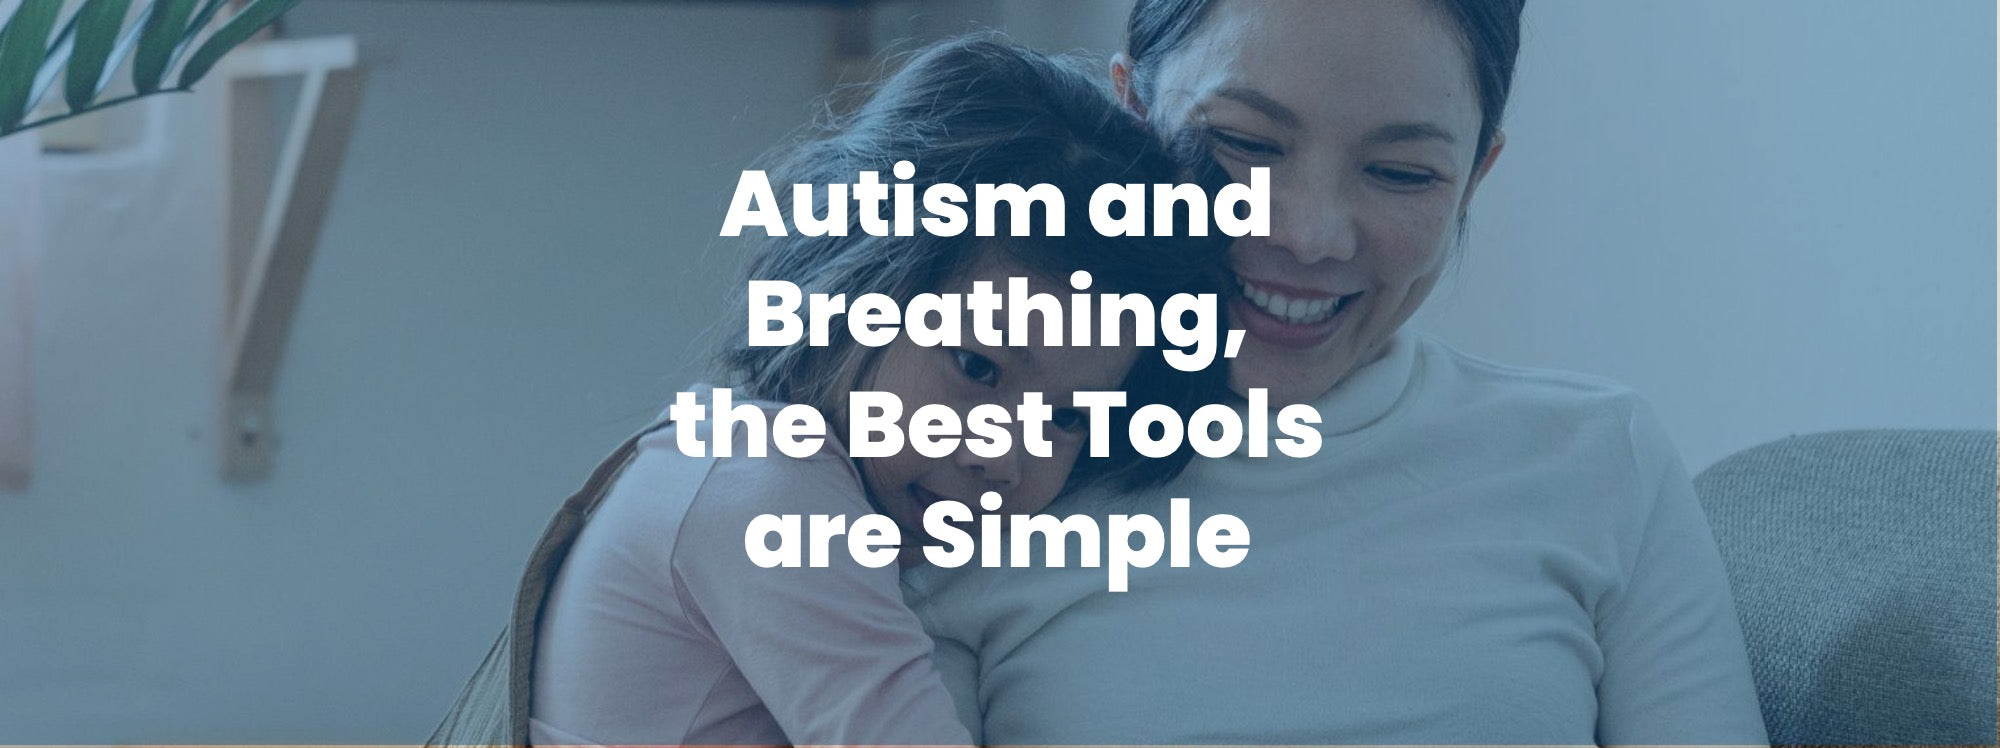 Autism and breathing, the best tools are simple 